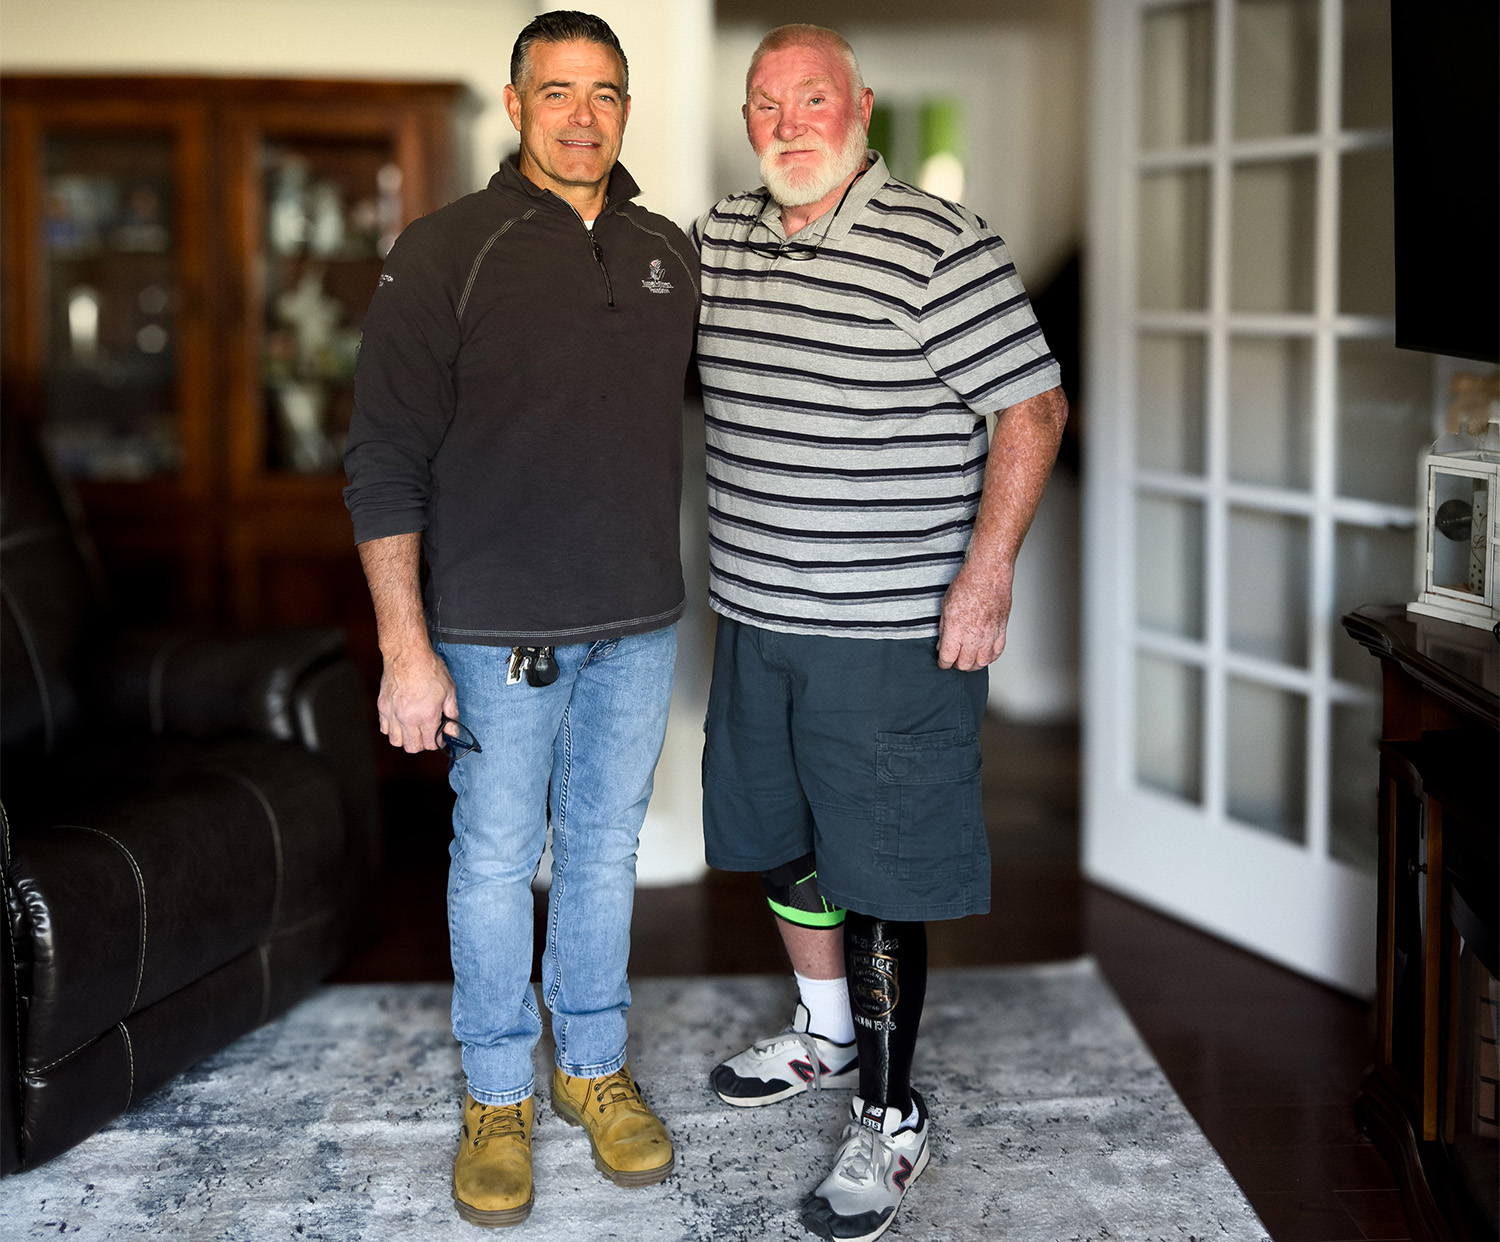 Mike navigating his newly renovated home, which ensures his mobility and independence, symbolizing gratitude and recognition for his service.